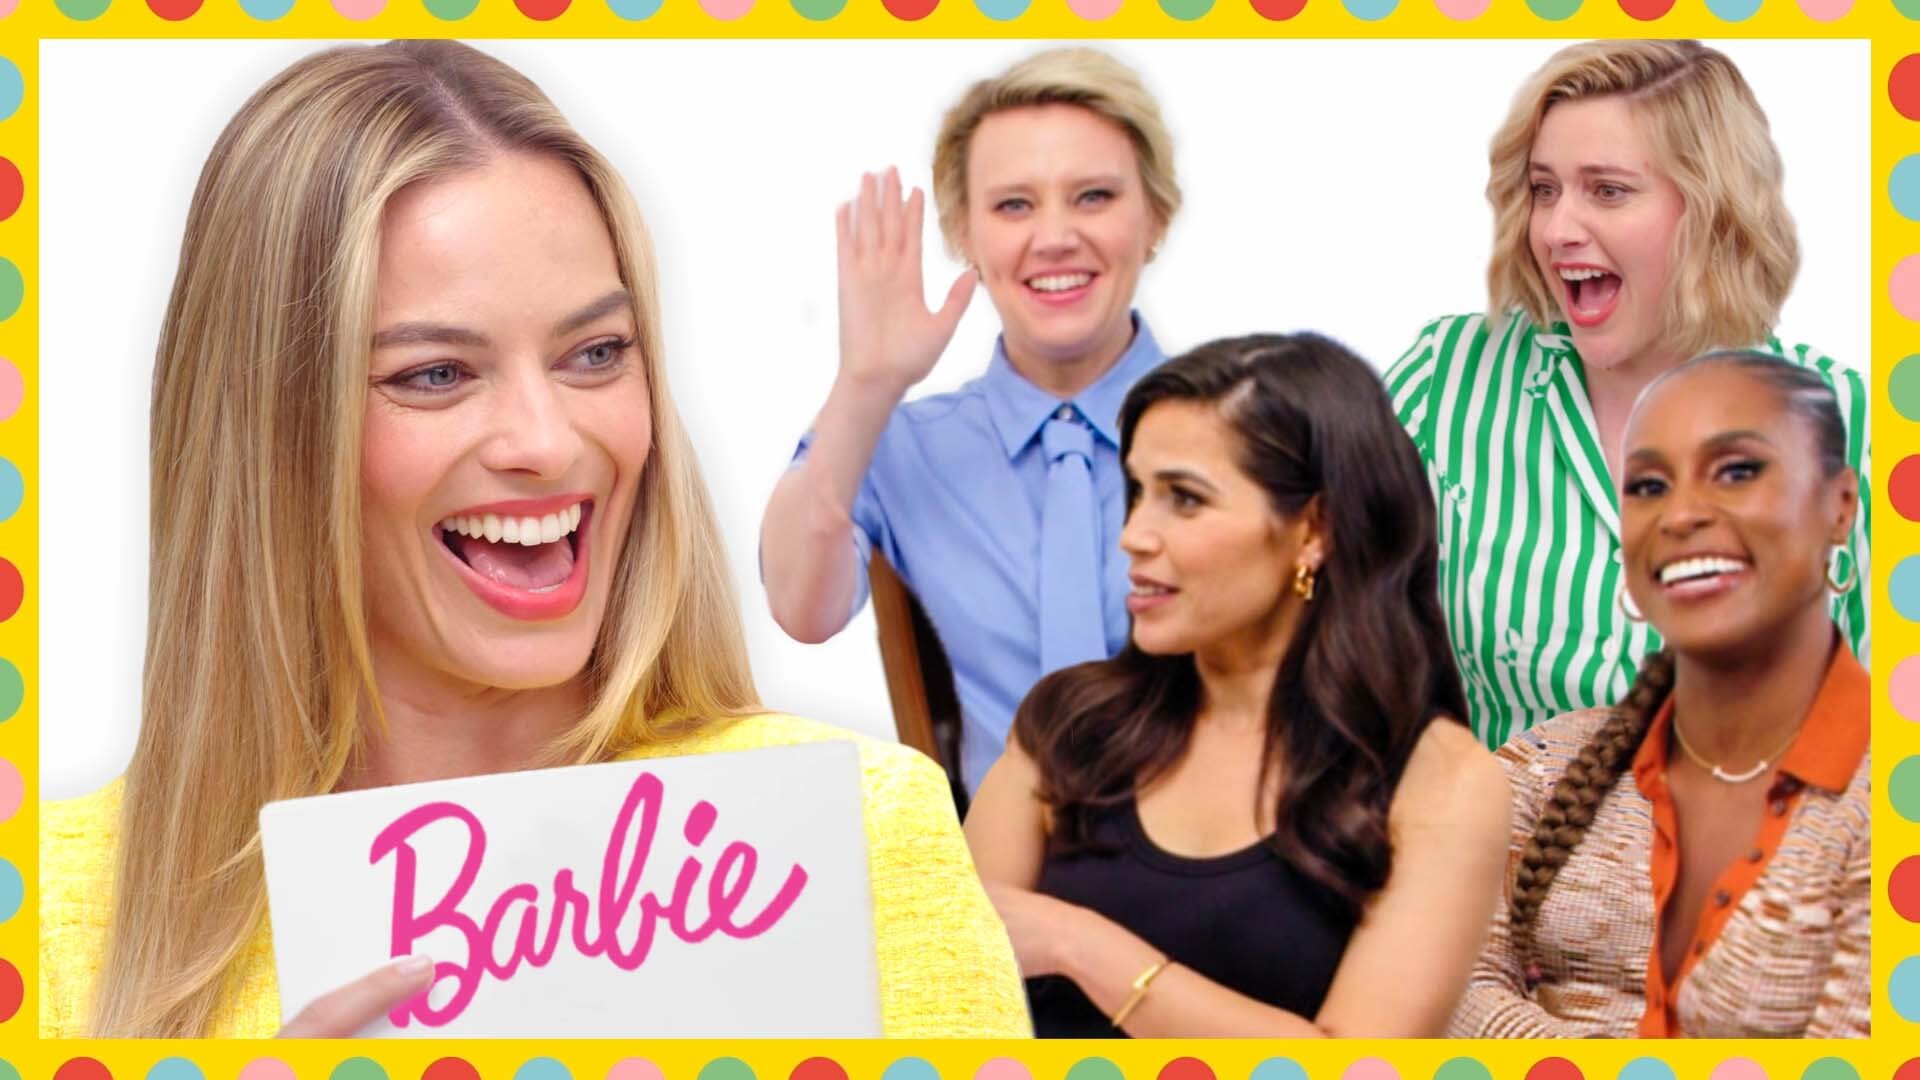 Watch 'Barbie' Cast Test How Well They Know Each Other Quizzing Each